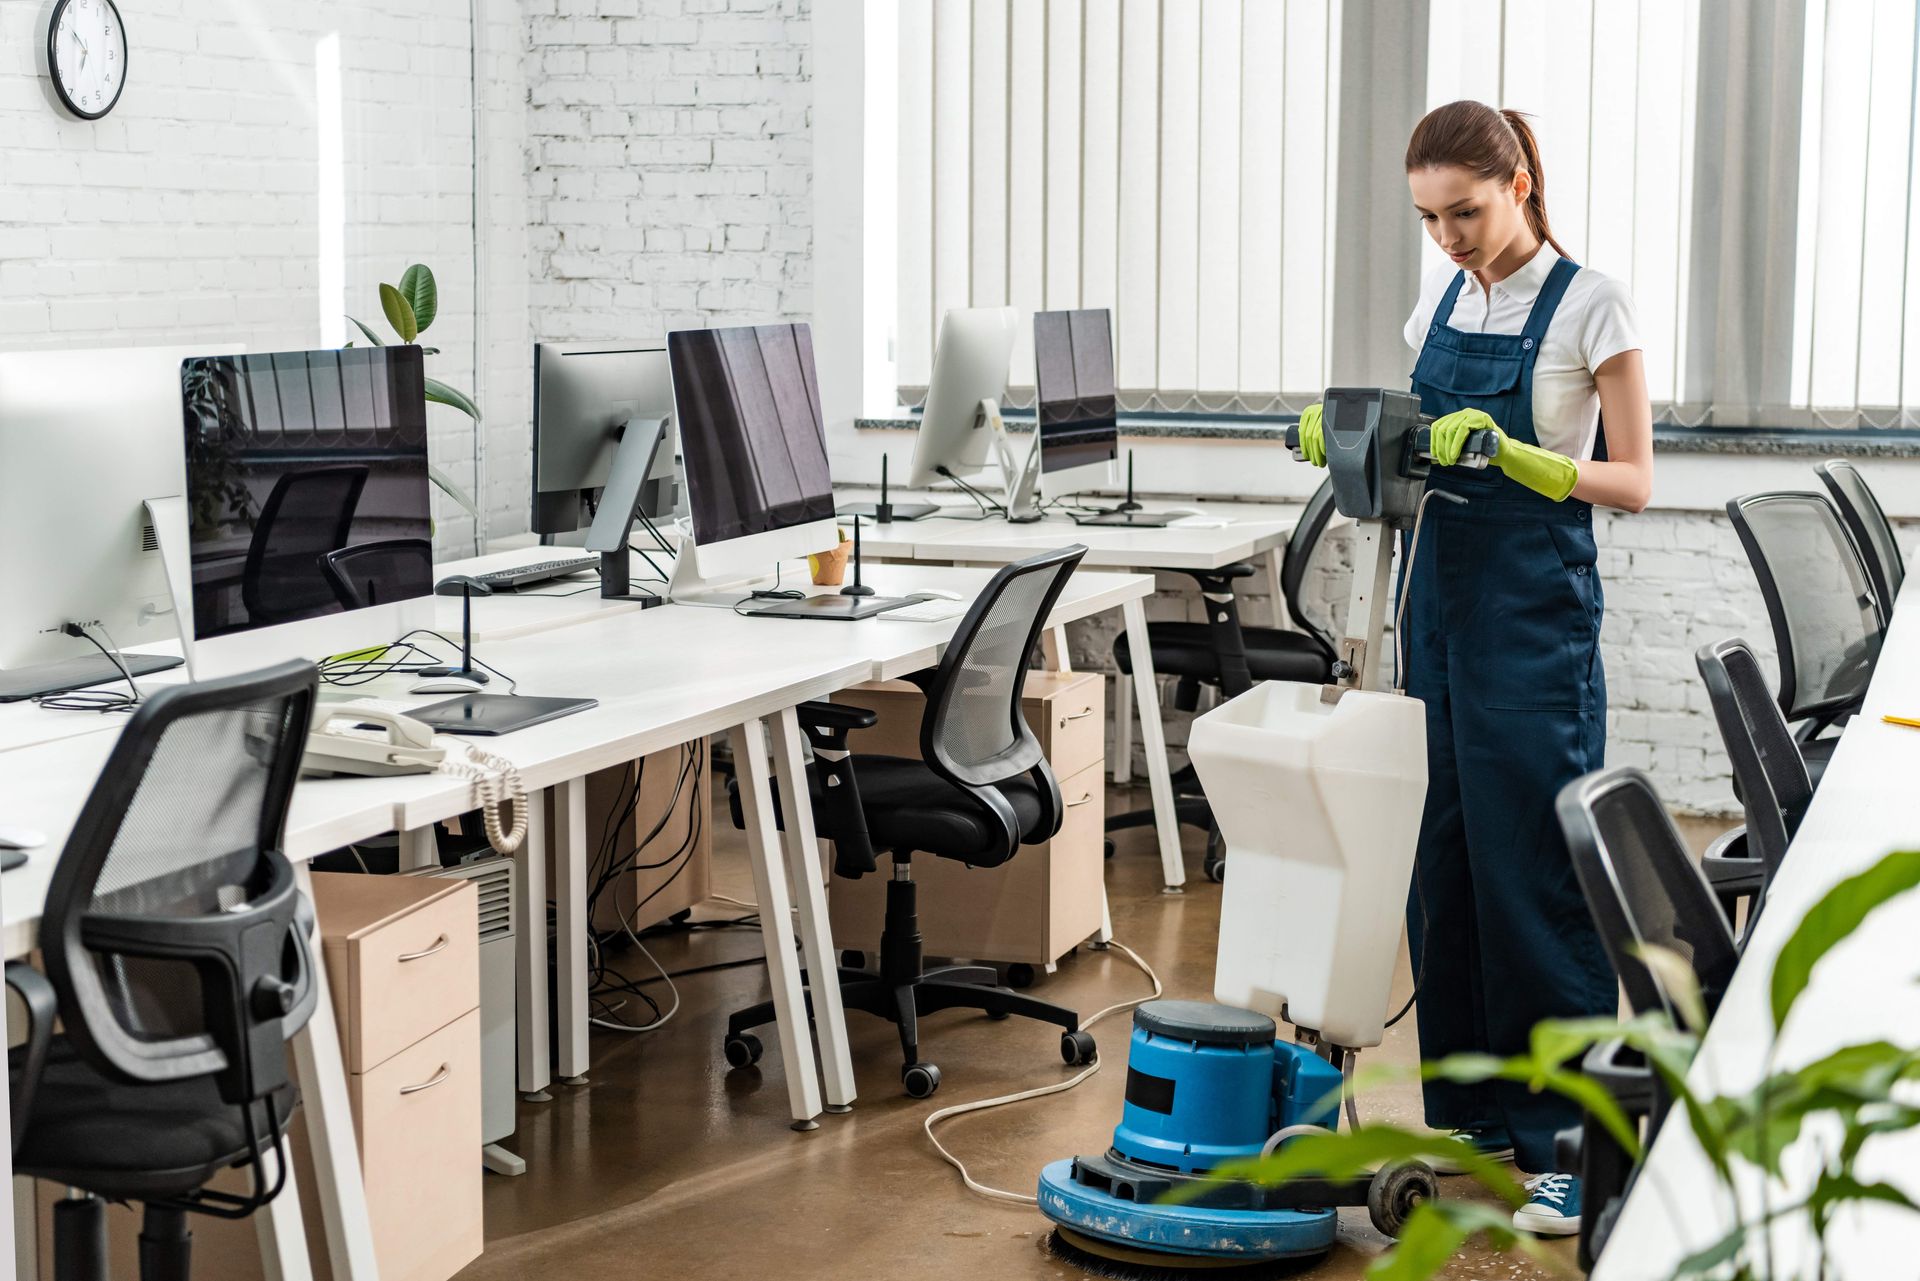 a woman is cleaning an office with a vacuum cleaner